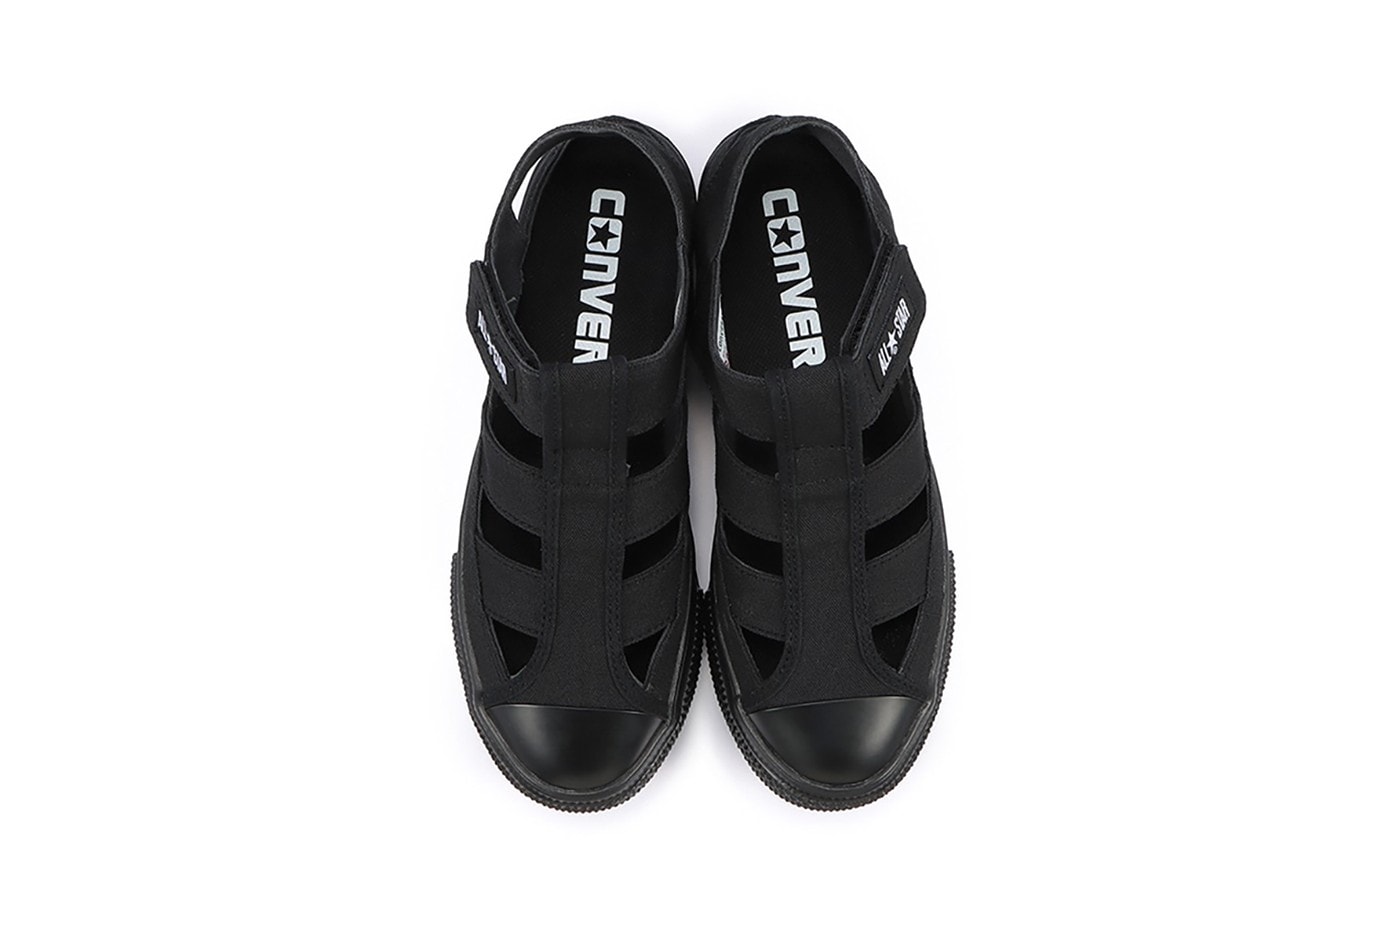 converse all star light plts gladiator ox sneakers sandals